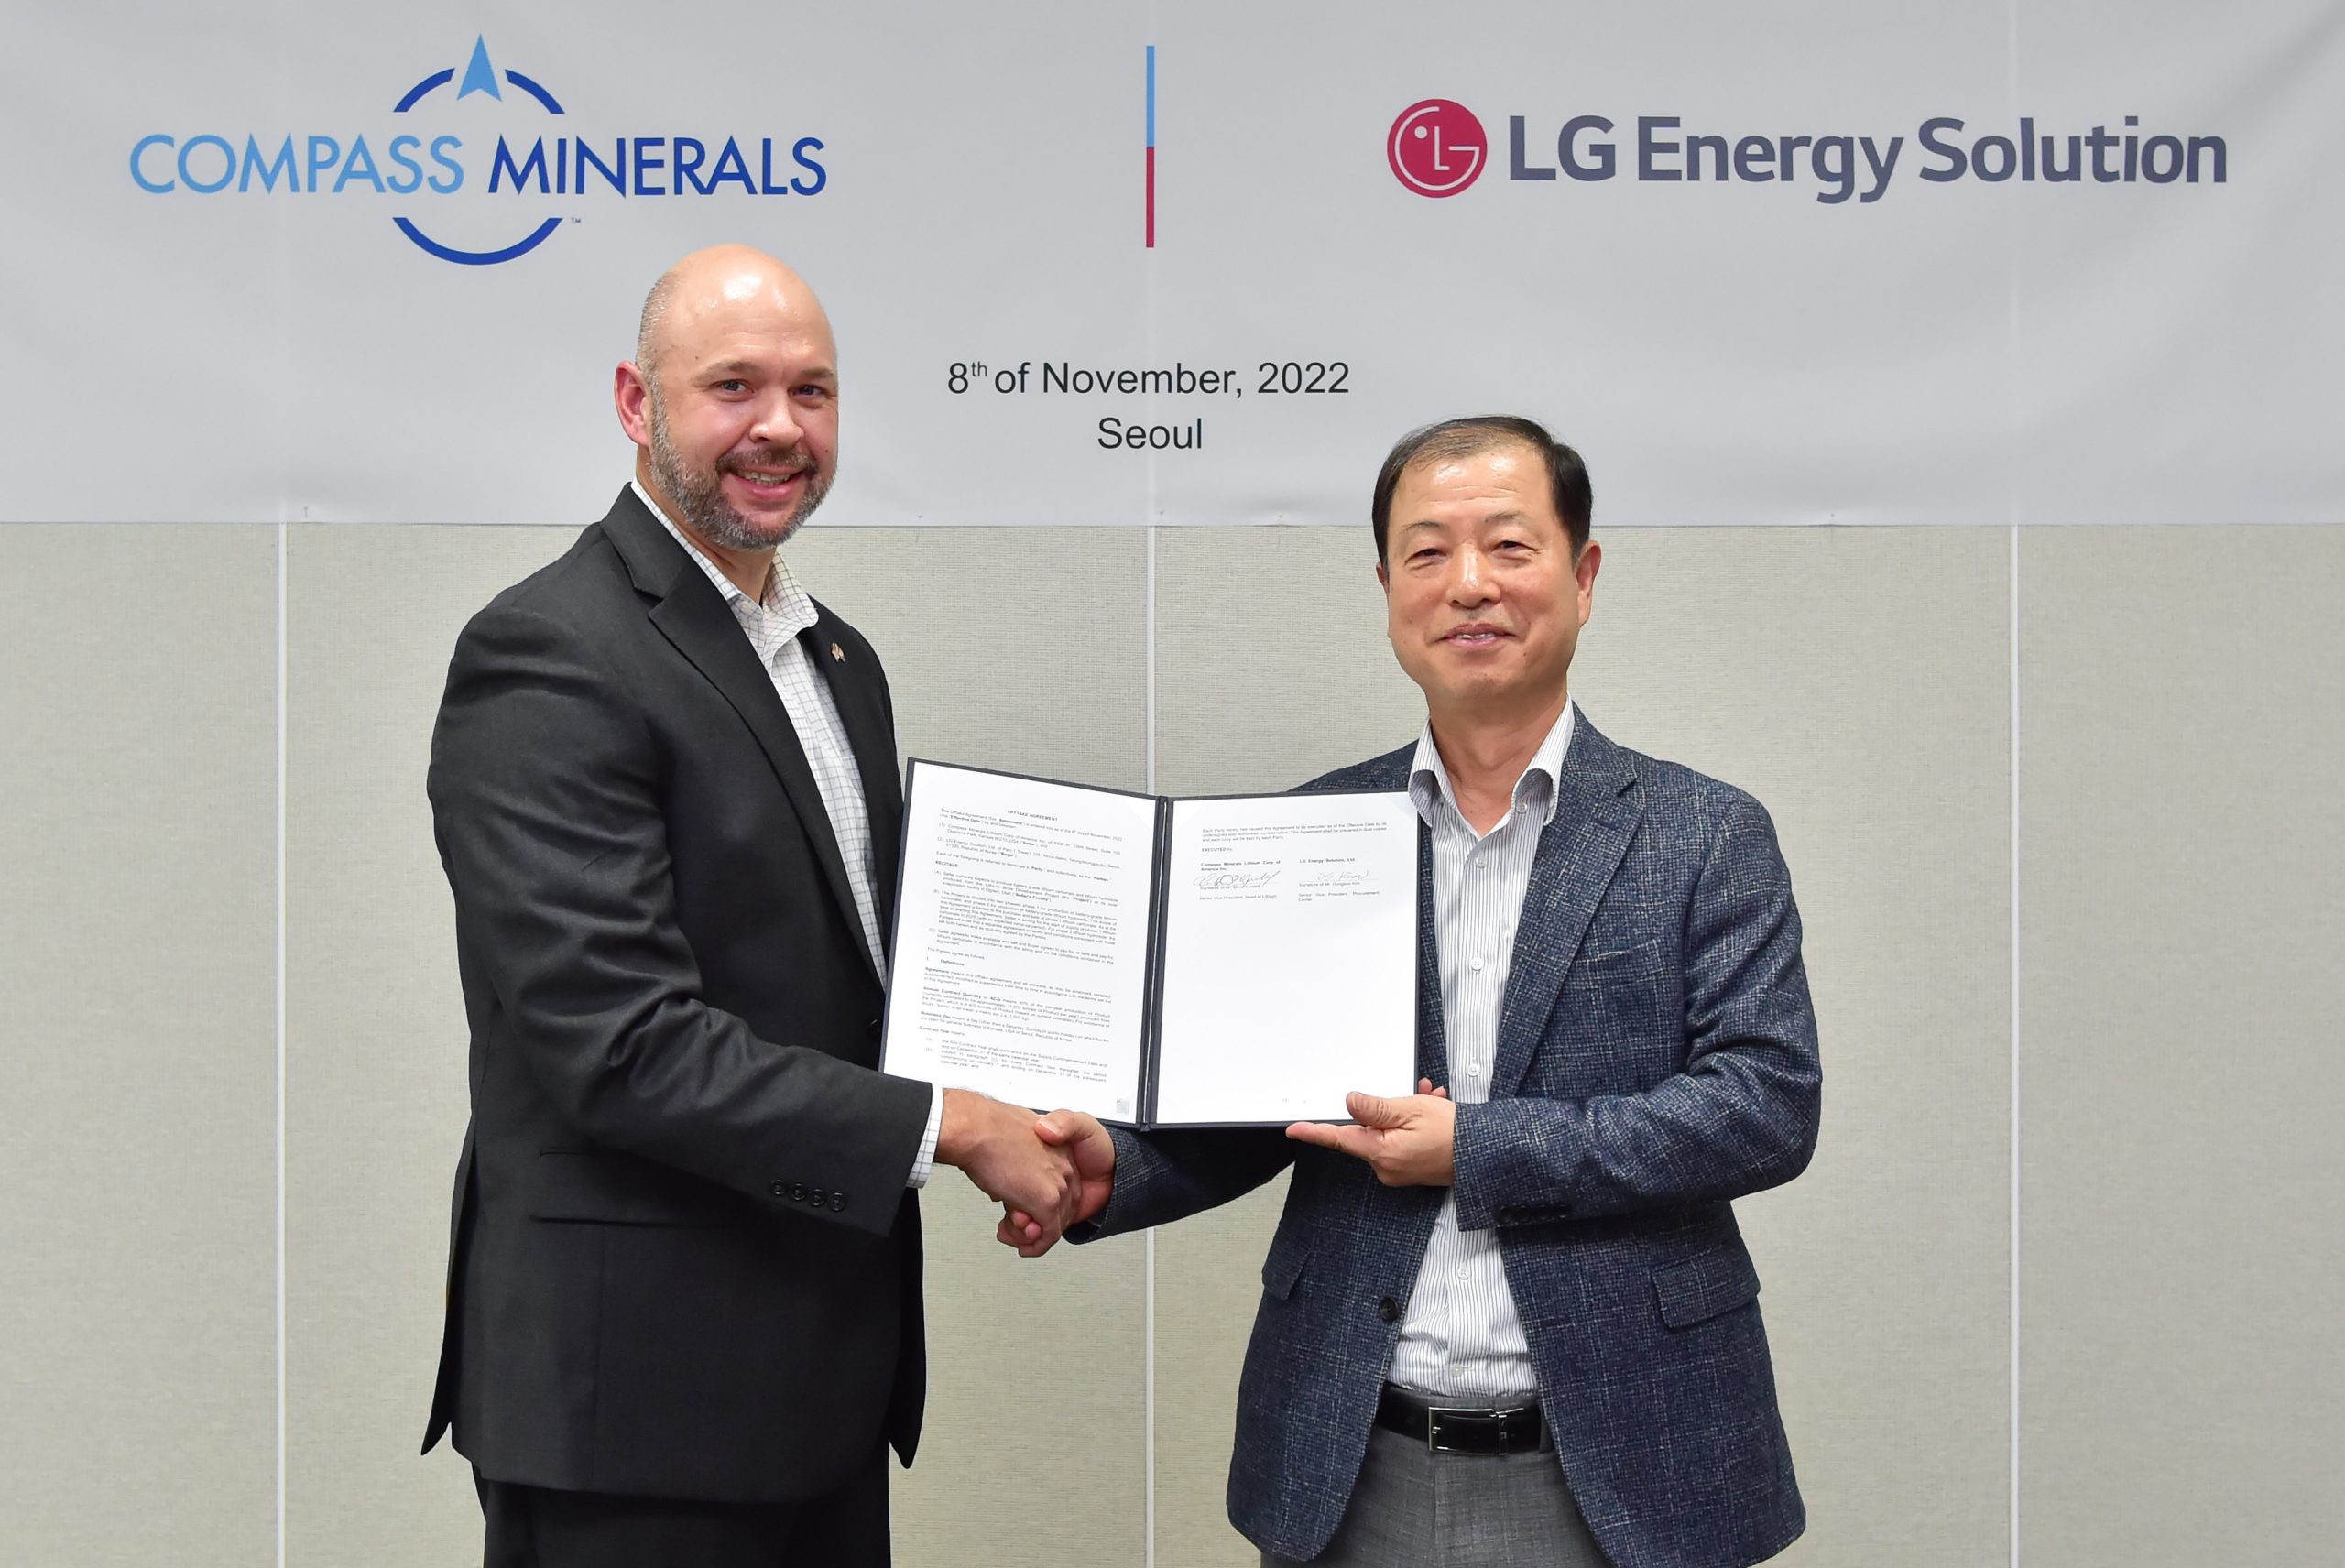 LG-Energy-Solution-Compass-Minerals